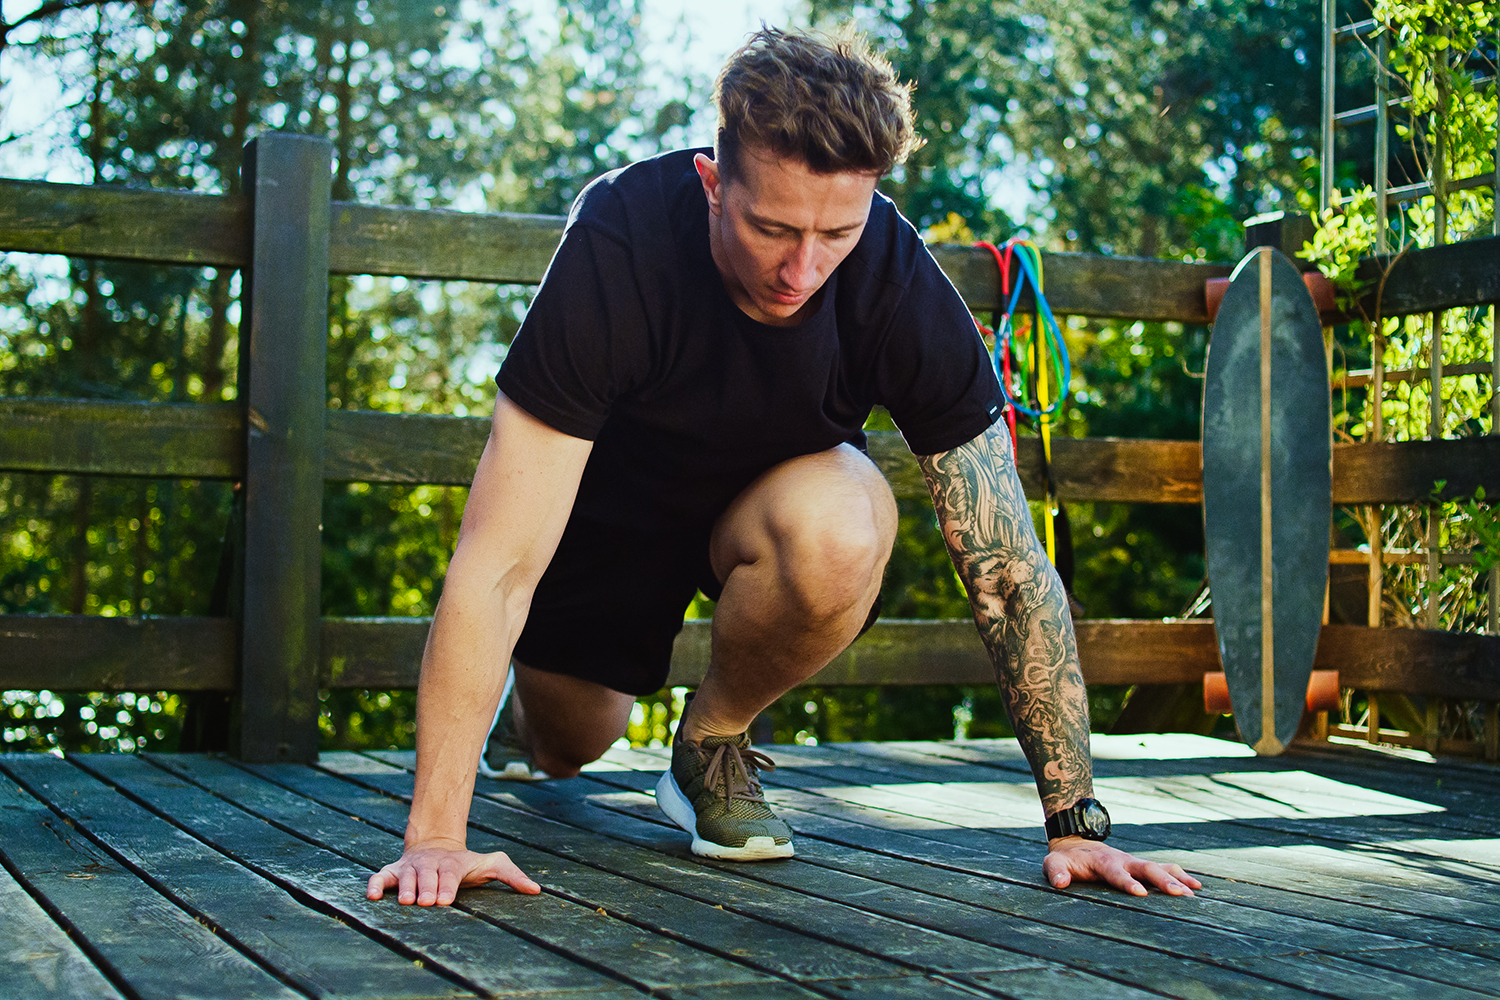 How to do burpees, a weight-free workout that gets you shredded fast